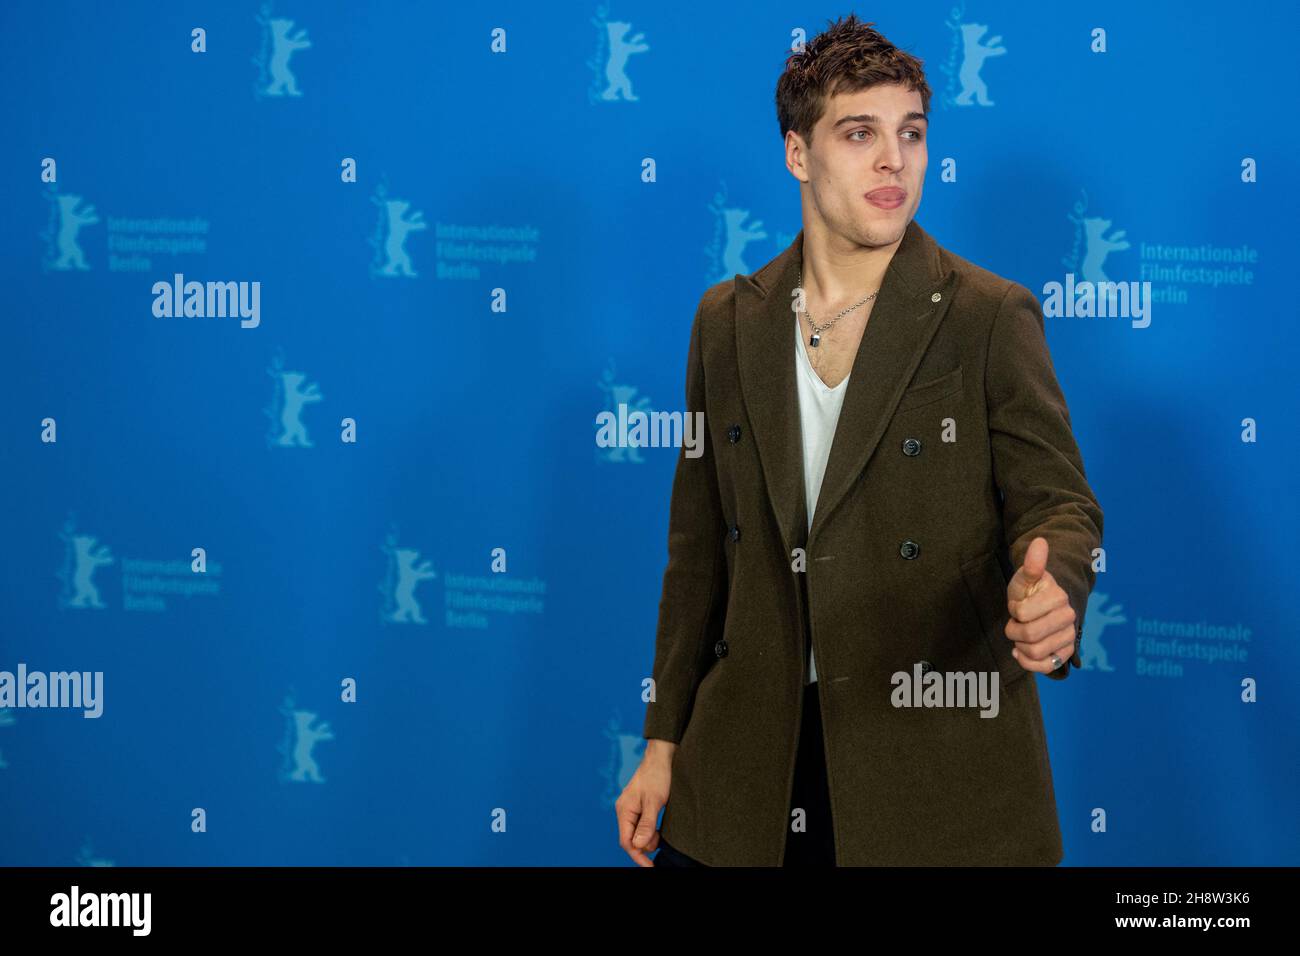 BERLIN, GERMANY-February 09: Jonas Dassler pose at the 'The Golden Glove' (Der Goldene Handschuh) photocall during the 69th Berlinale International Stock Photo